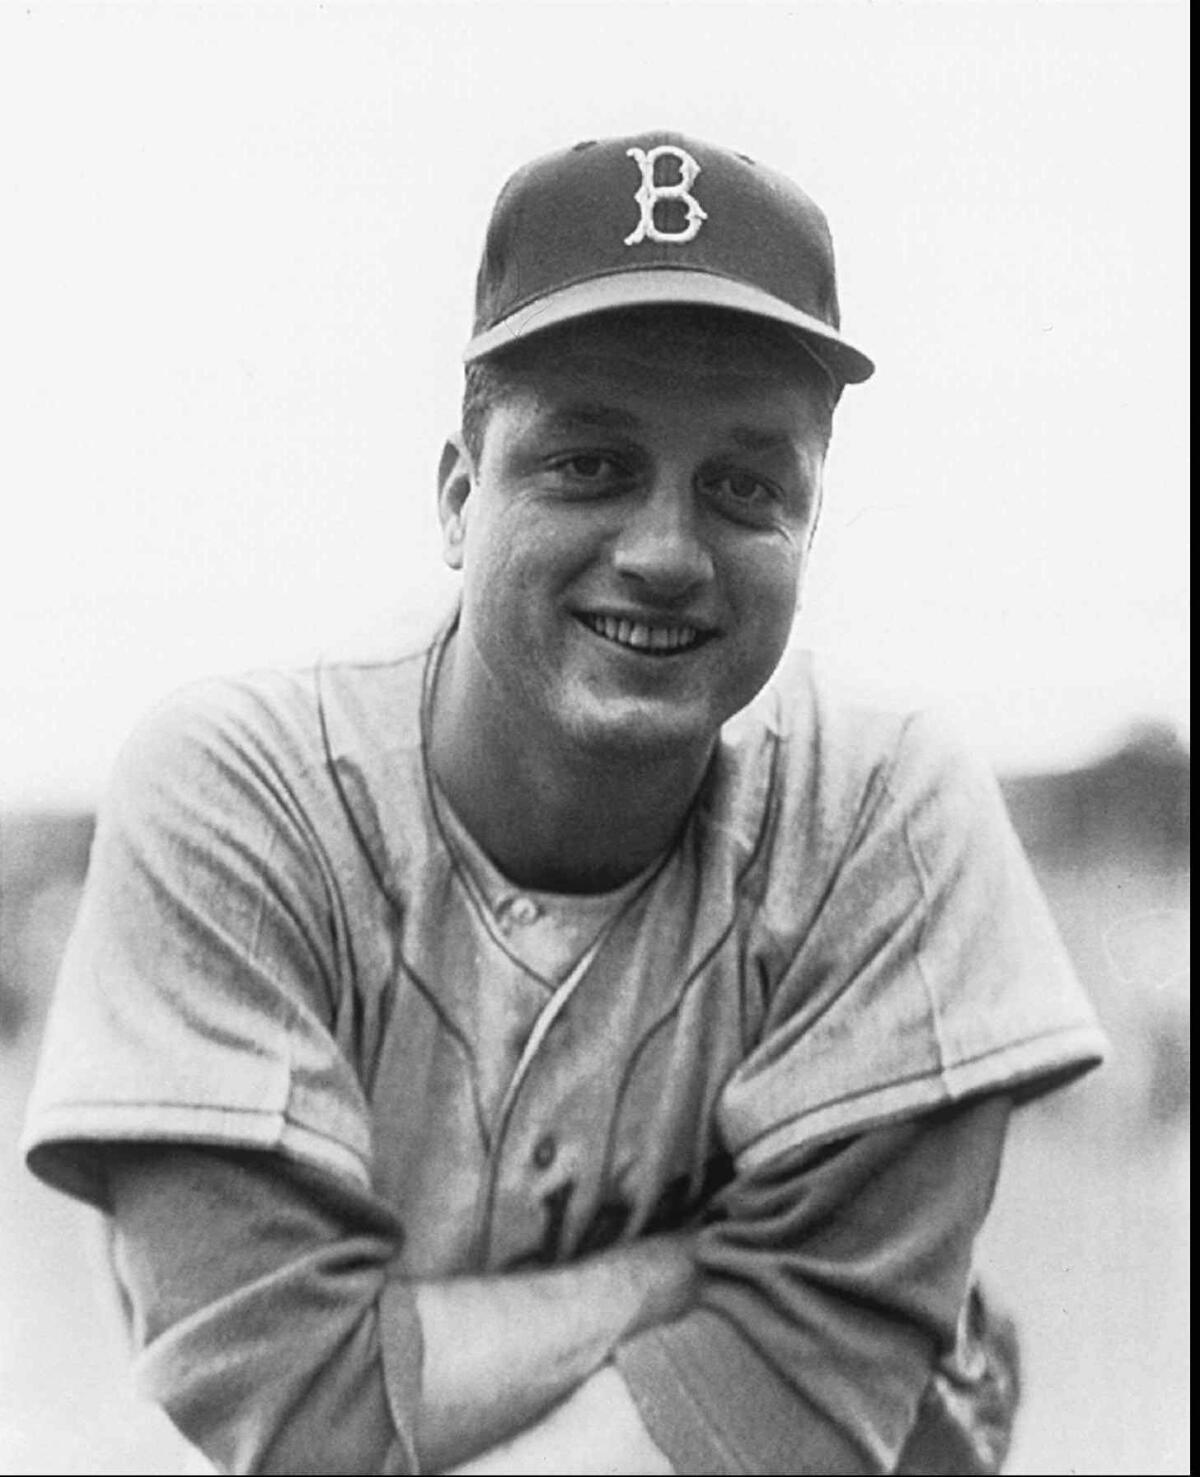 Tommy Lasorda is shown in this undated file photo when he was a player for the Brooklyn Dodgers. (George Brace / Associated Press)